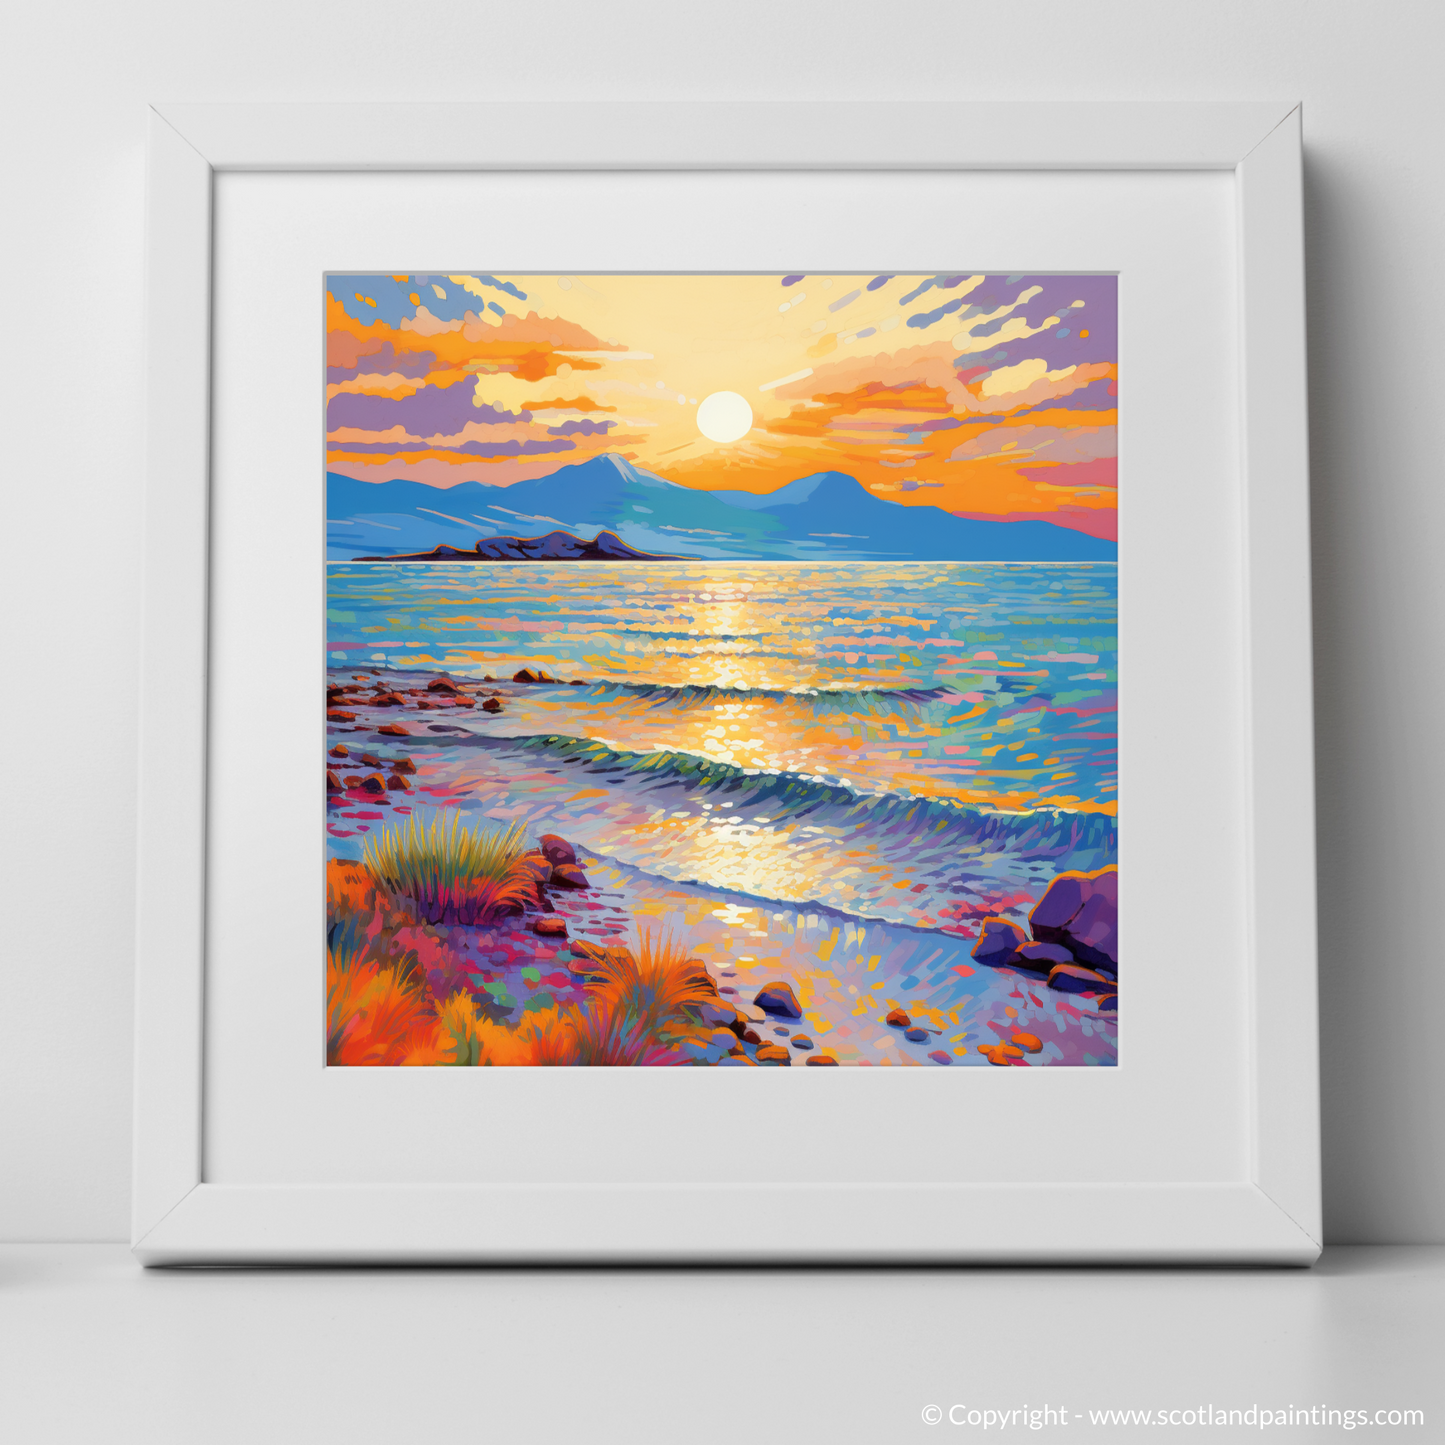 Painting and Art Print of Isle of Arran, Firth of Clyde in summer. Sunset Serenade over Isle of Arran.